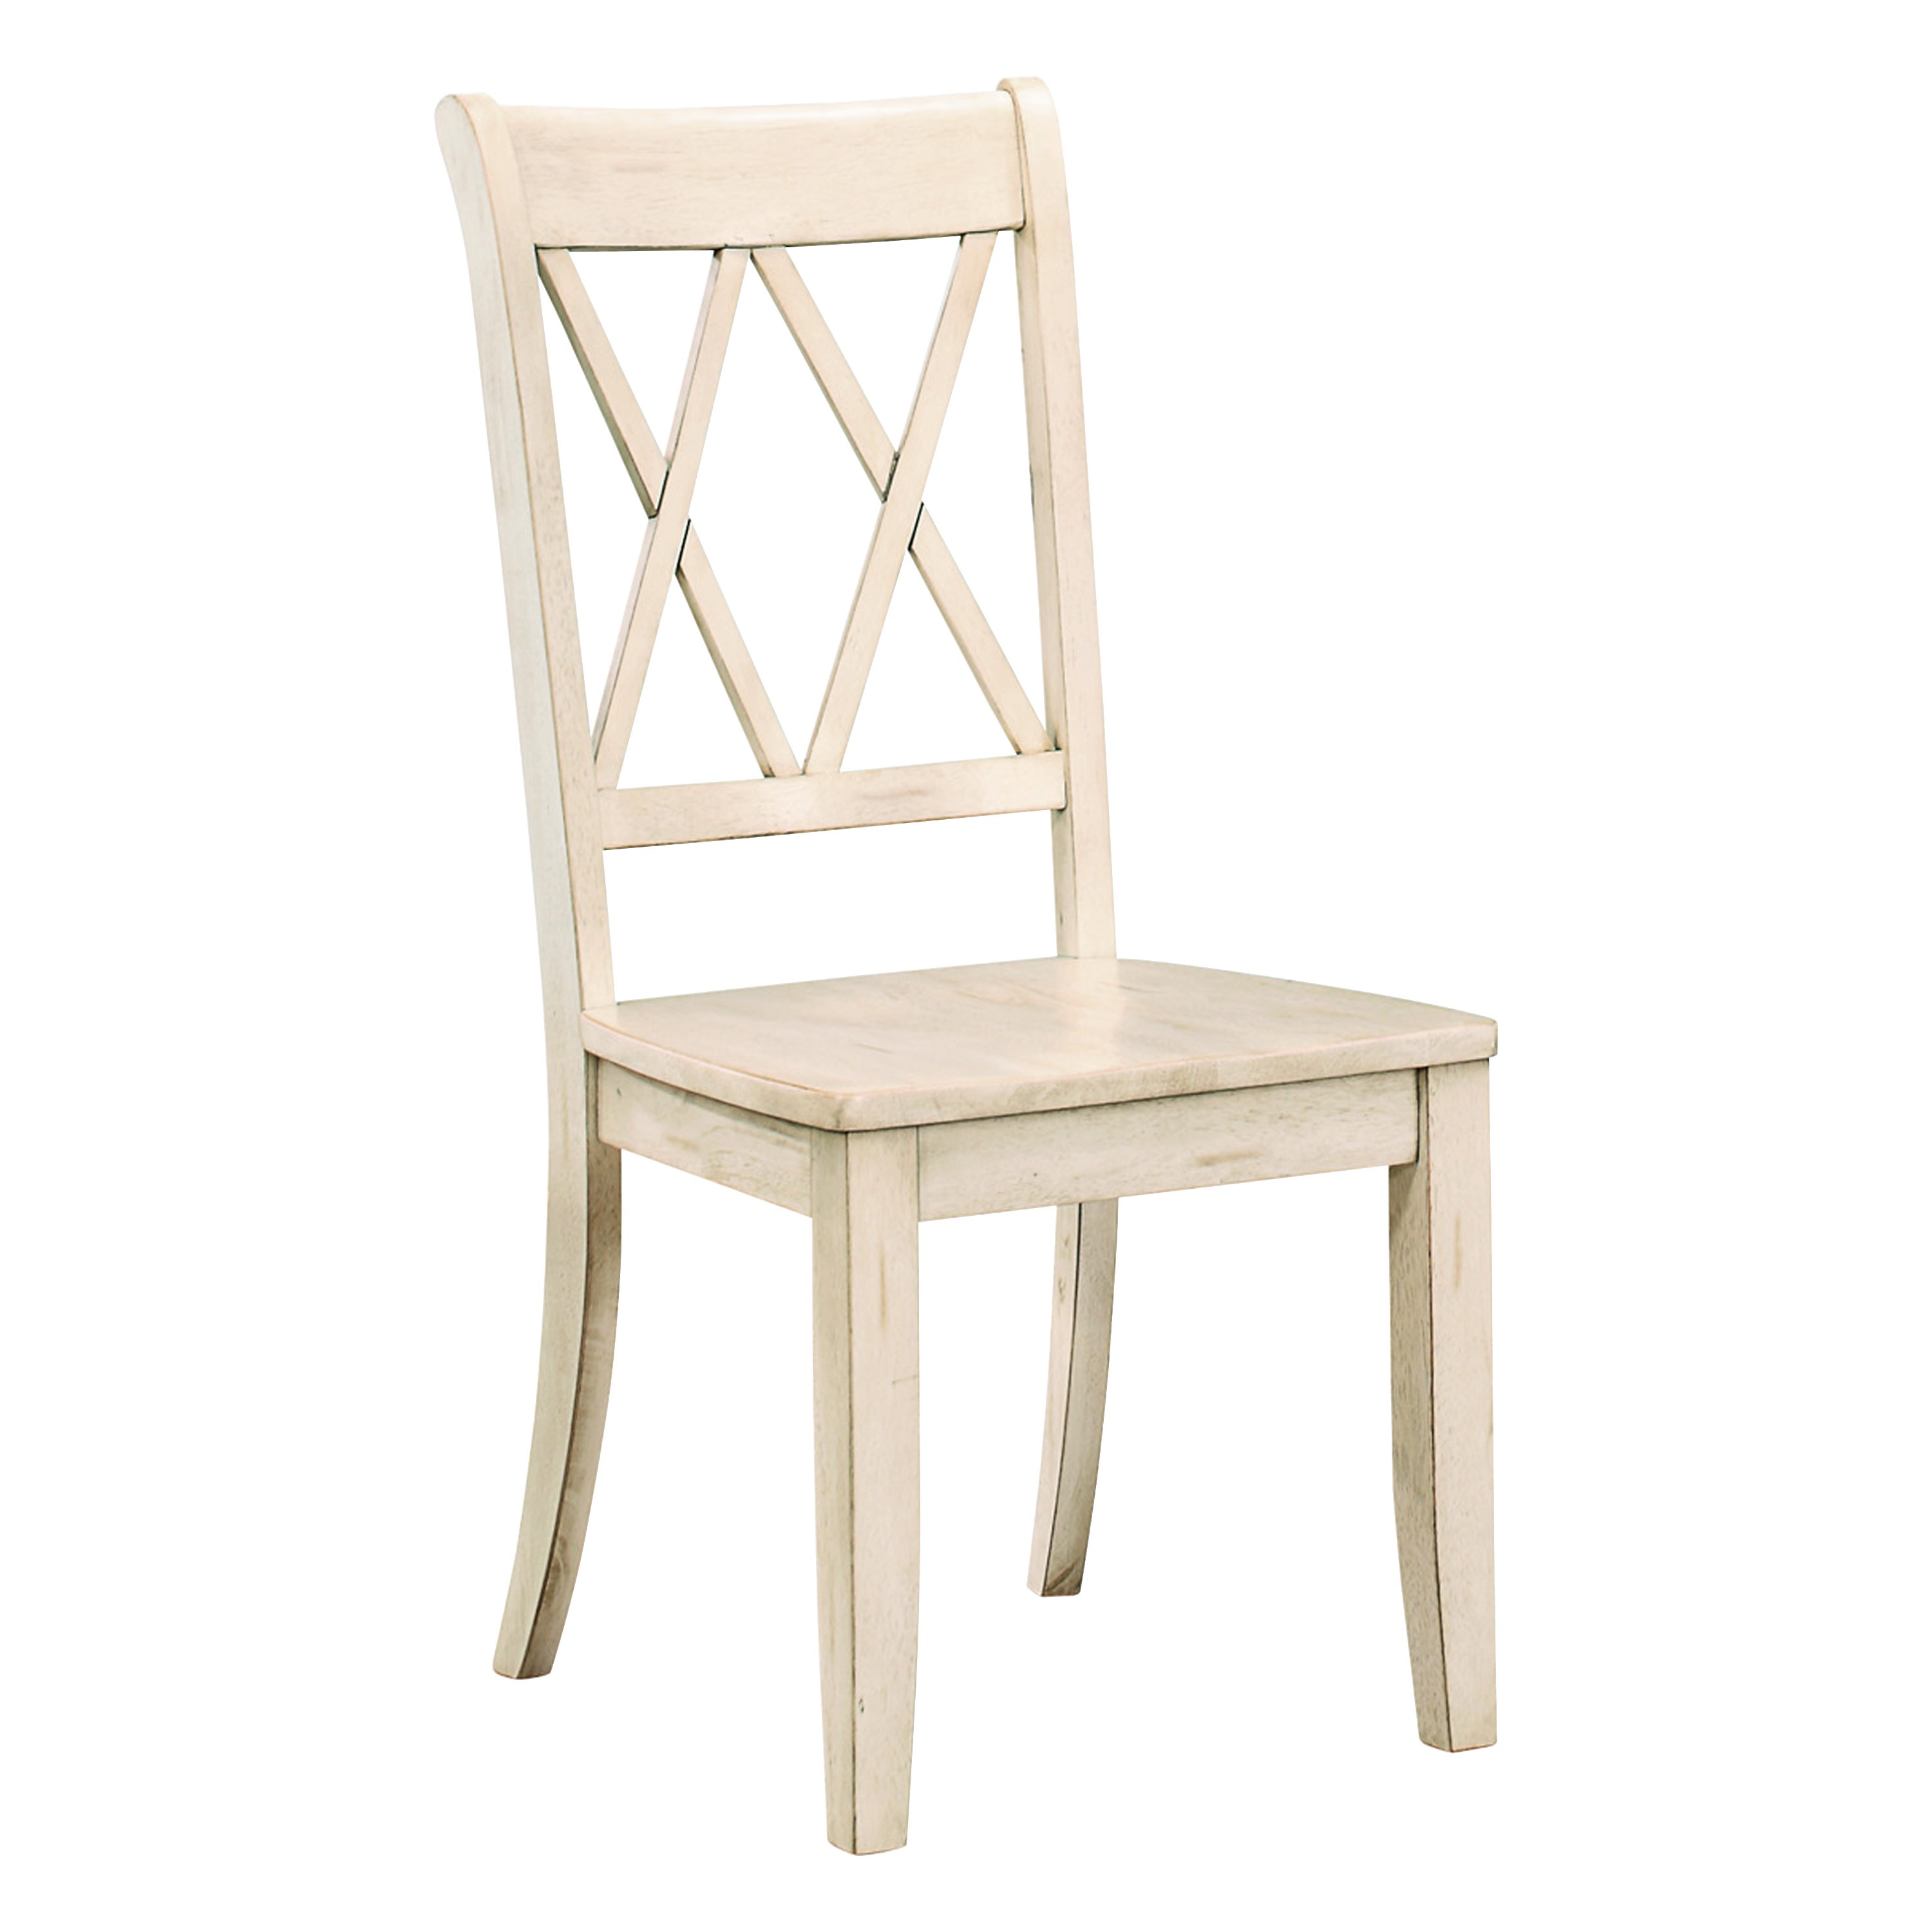 Casual White Finish Chairs Set of 2 Pine Veneer Transitional Double-X Back Design Dining Room Chairs-Boyel Living